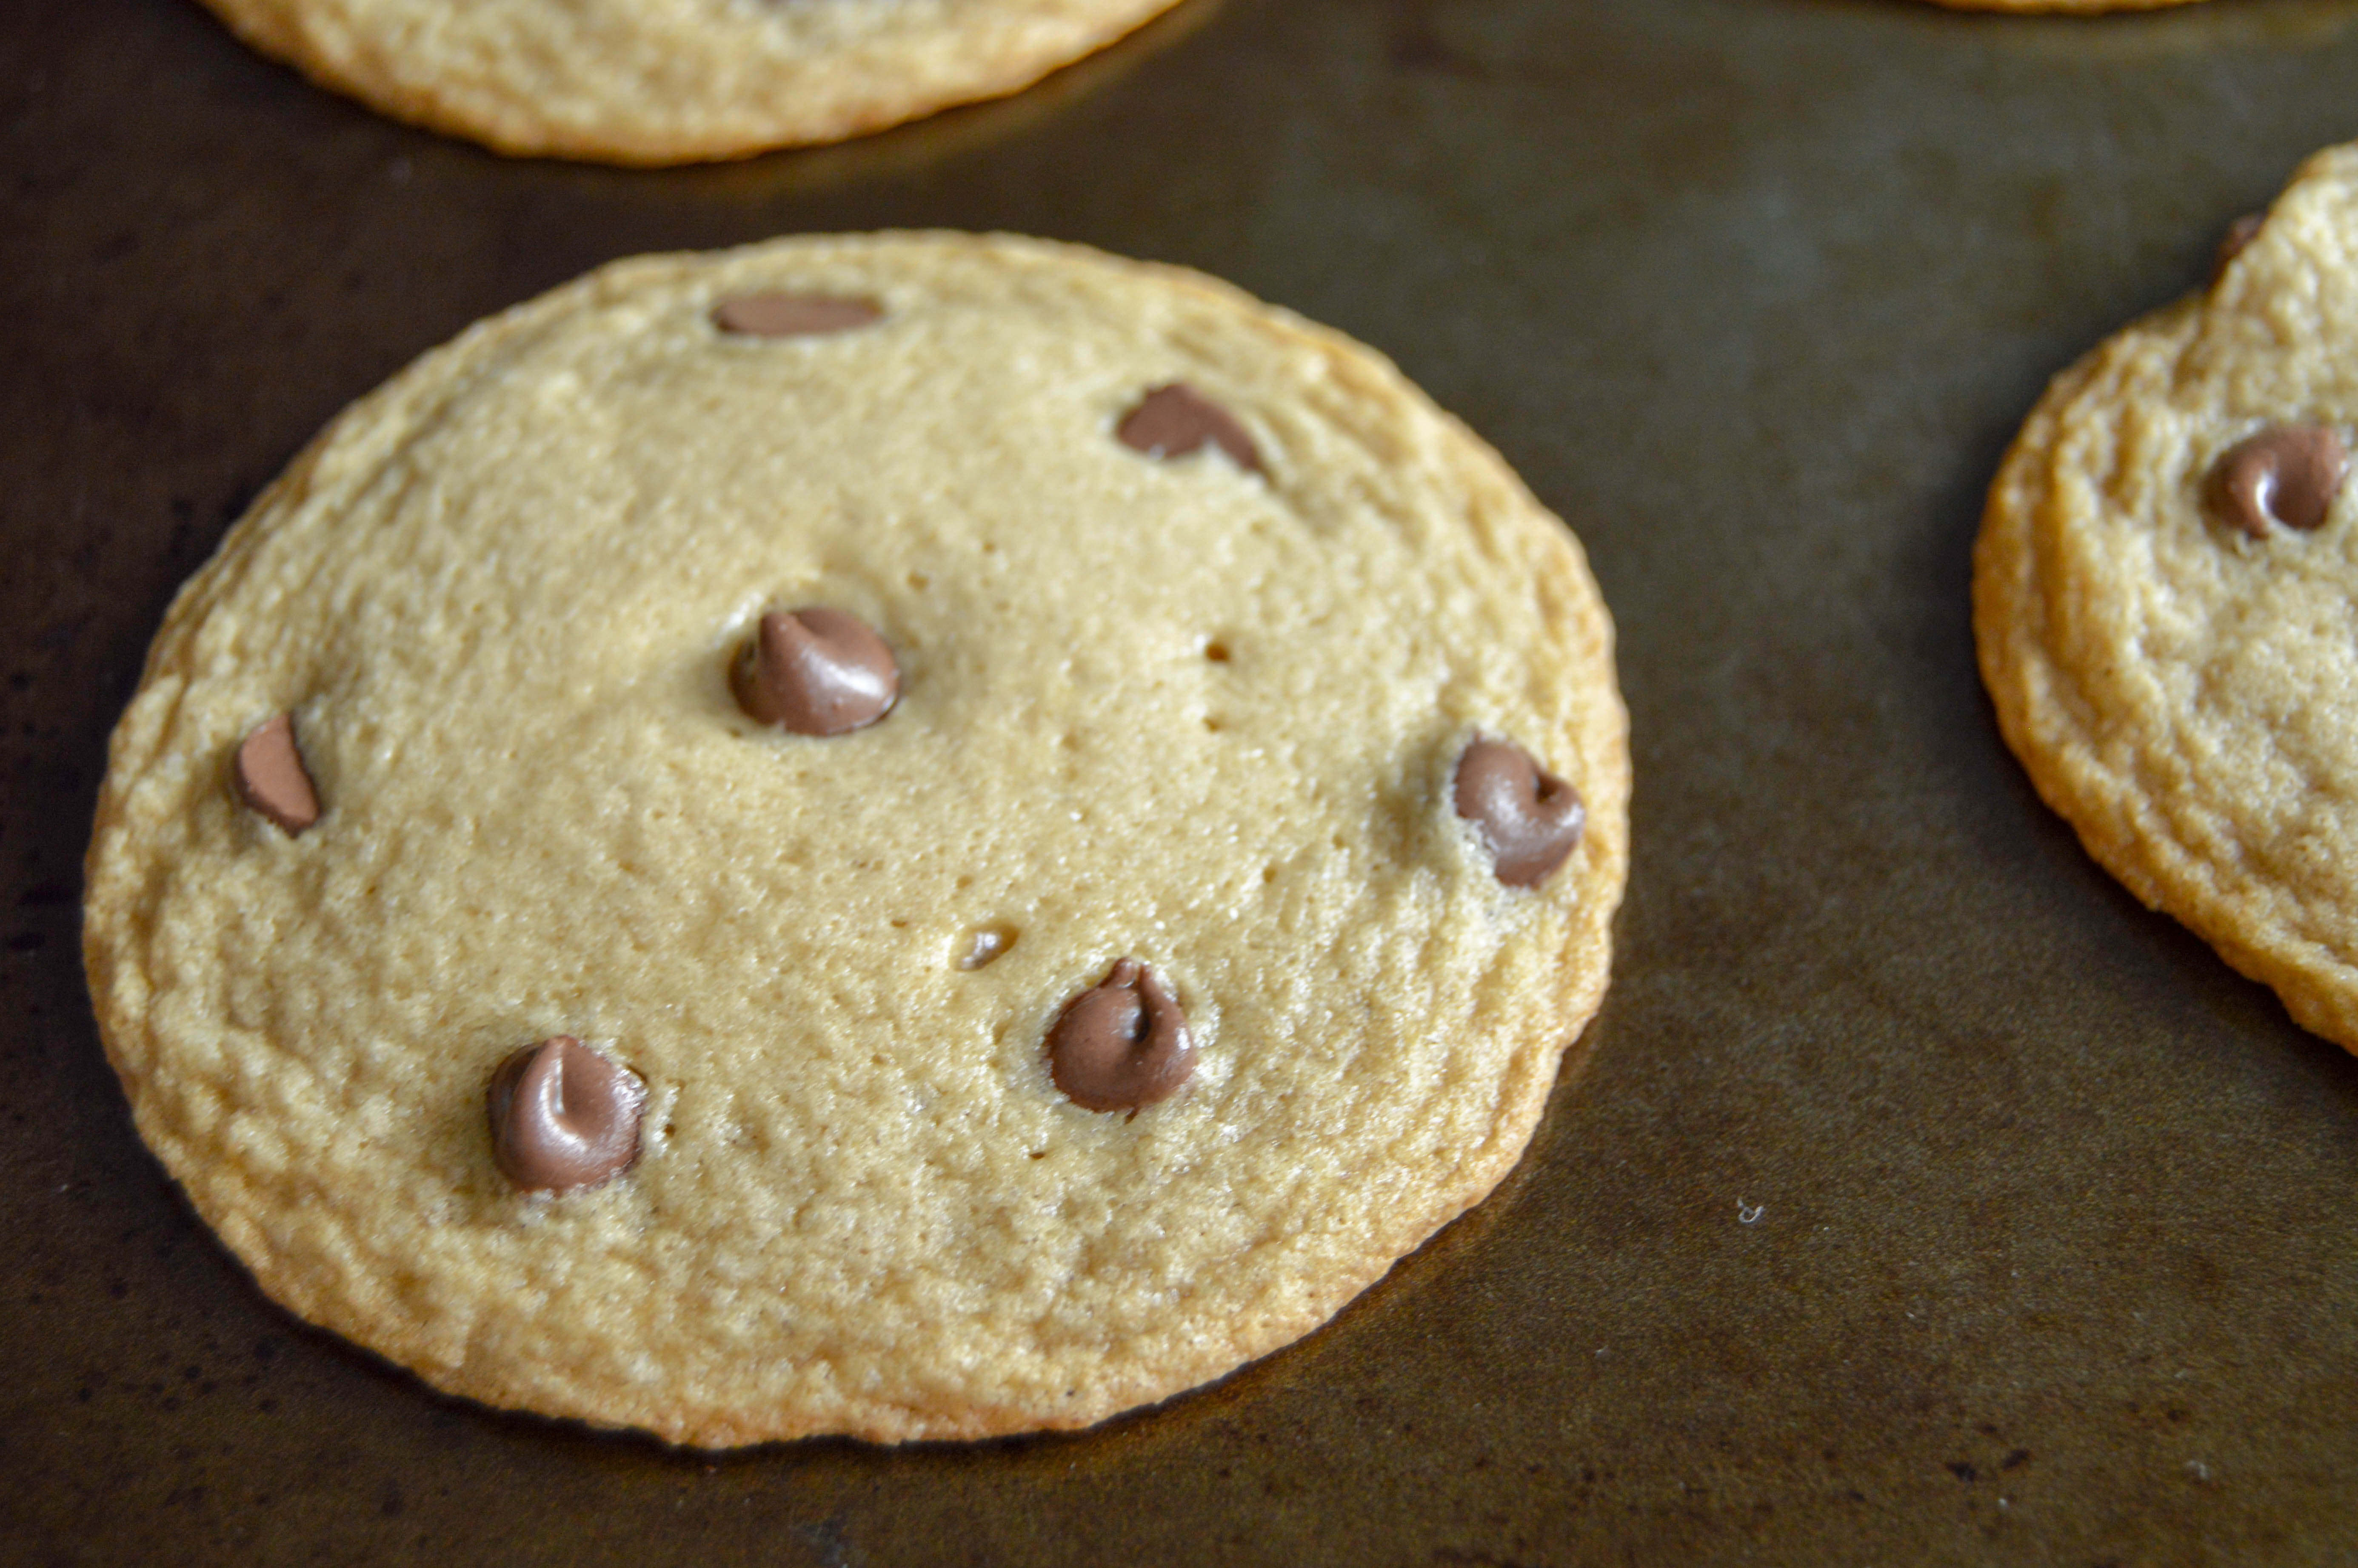 Milk chocolate chip cookies with a golden brown edge and gooey middle.